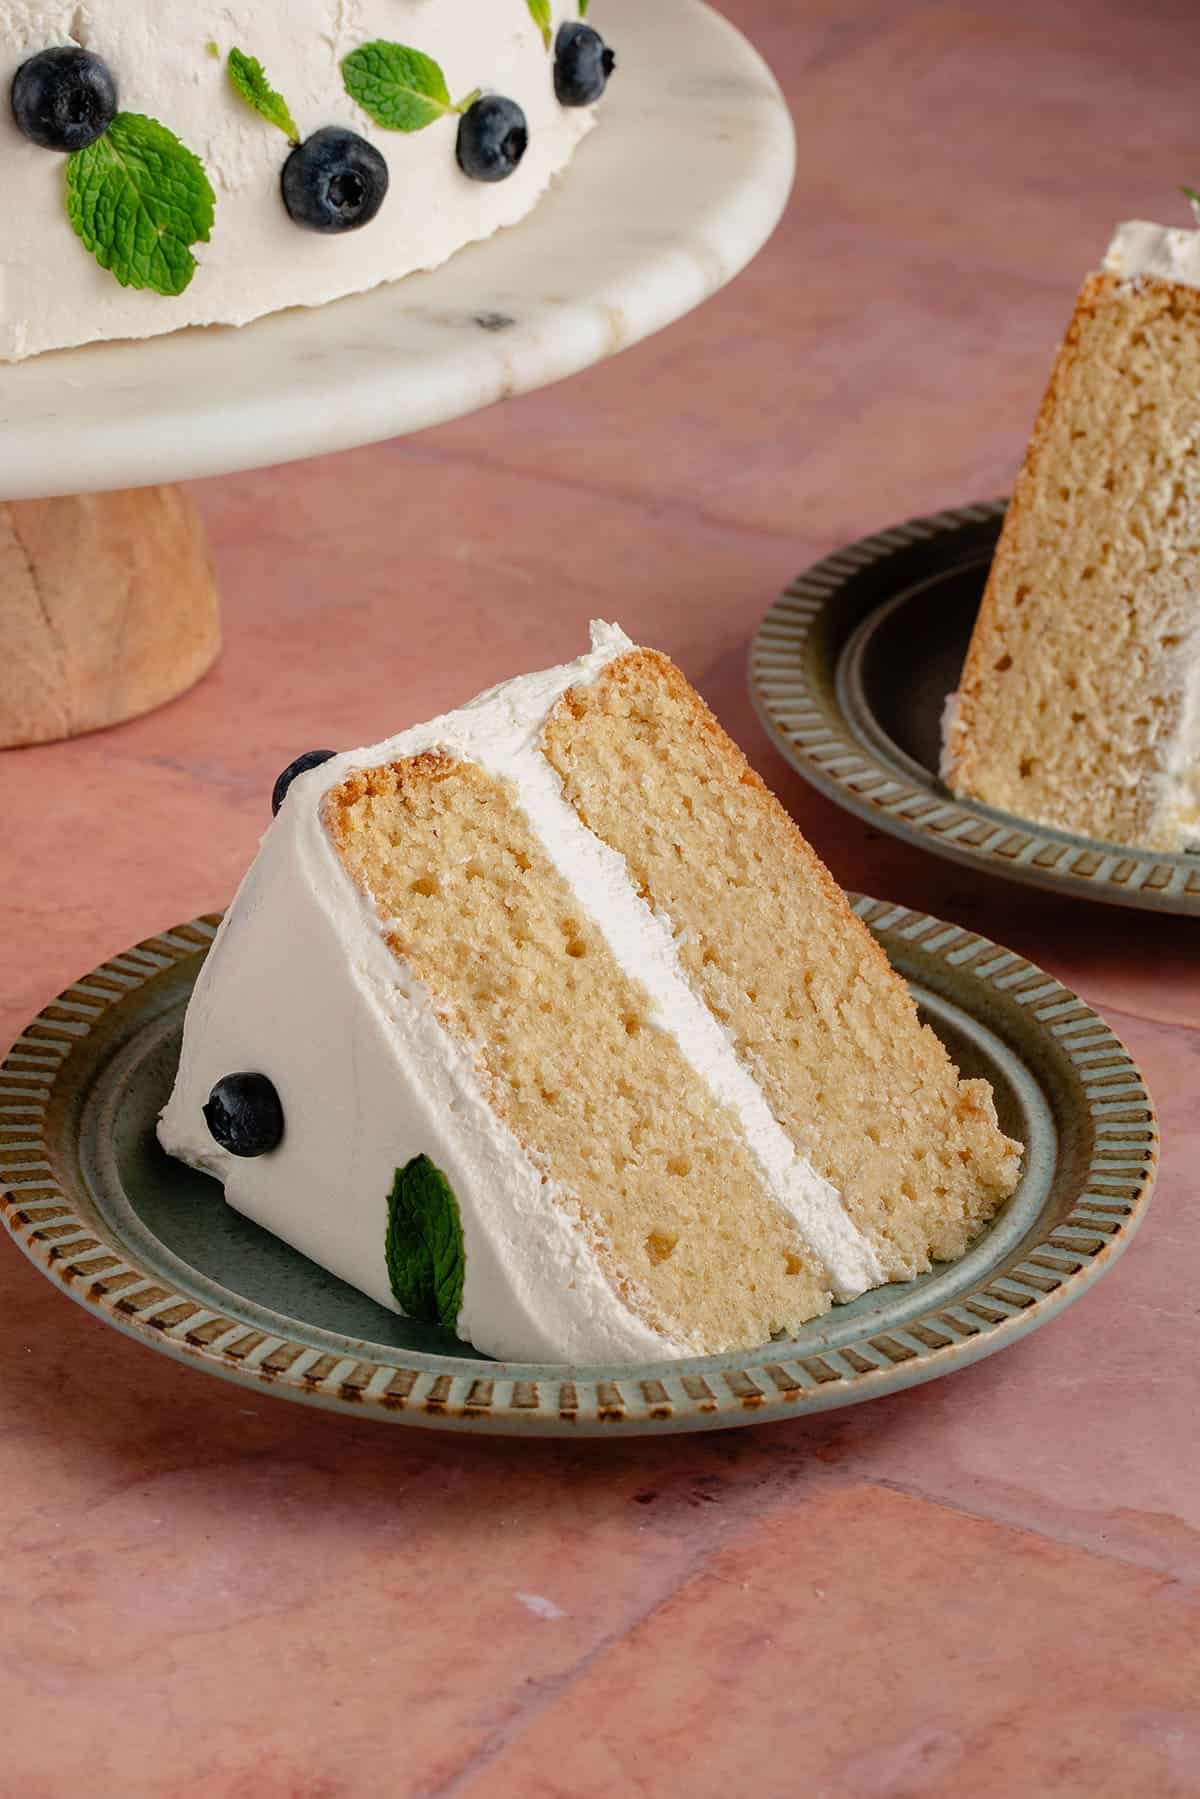 slice of vegan vanilla cake with buttercream frosting on a dark green plate with another slice of cake peaking in the background along with the full cake on the stand